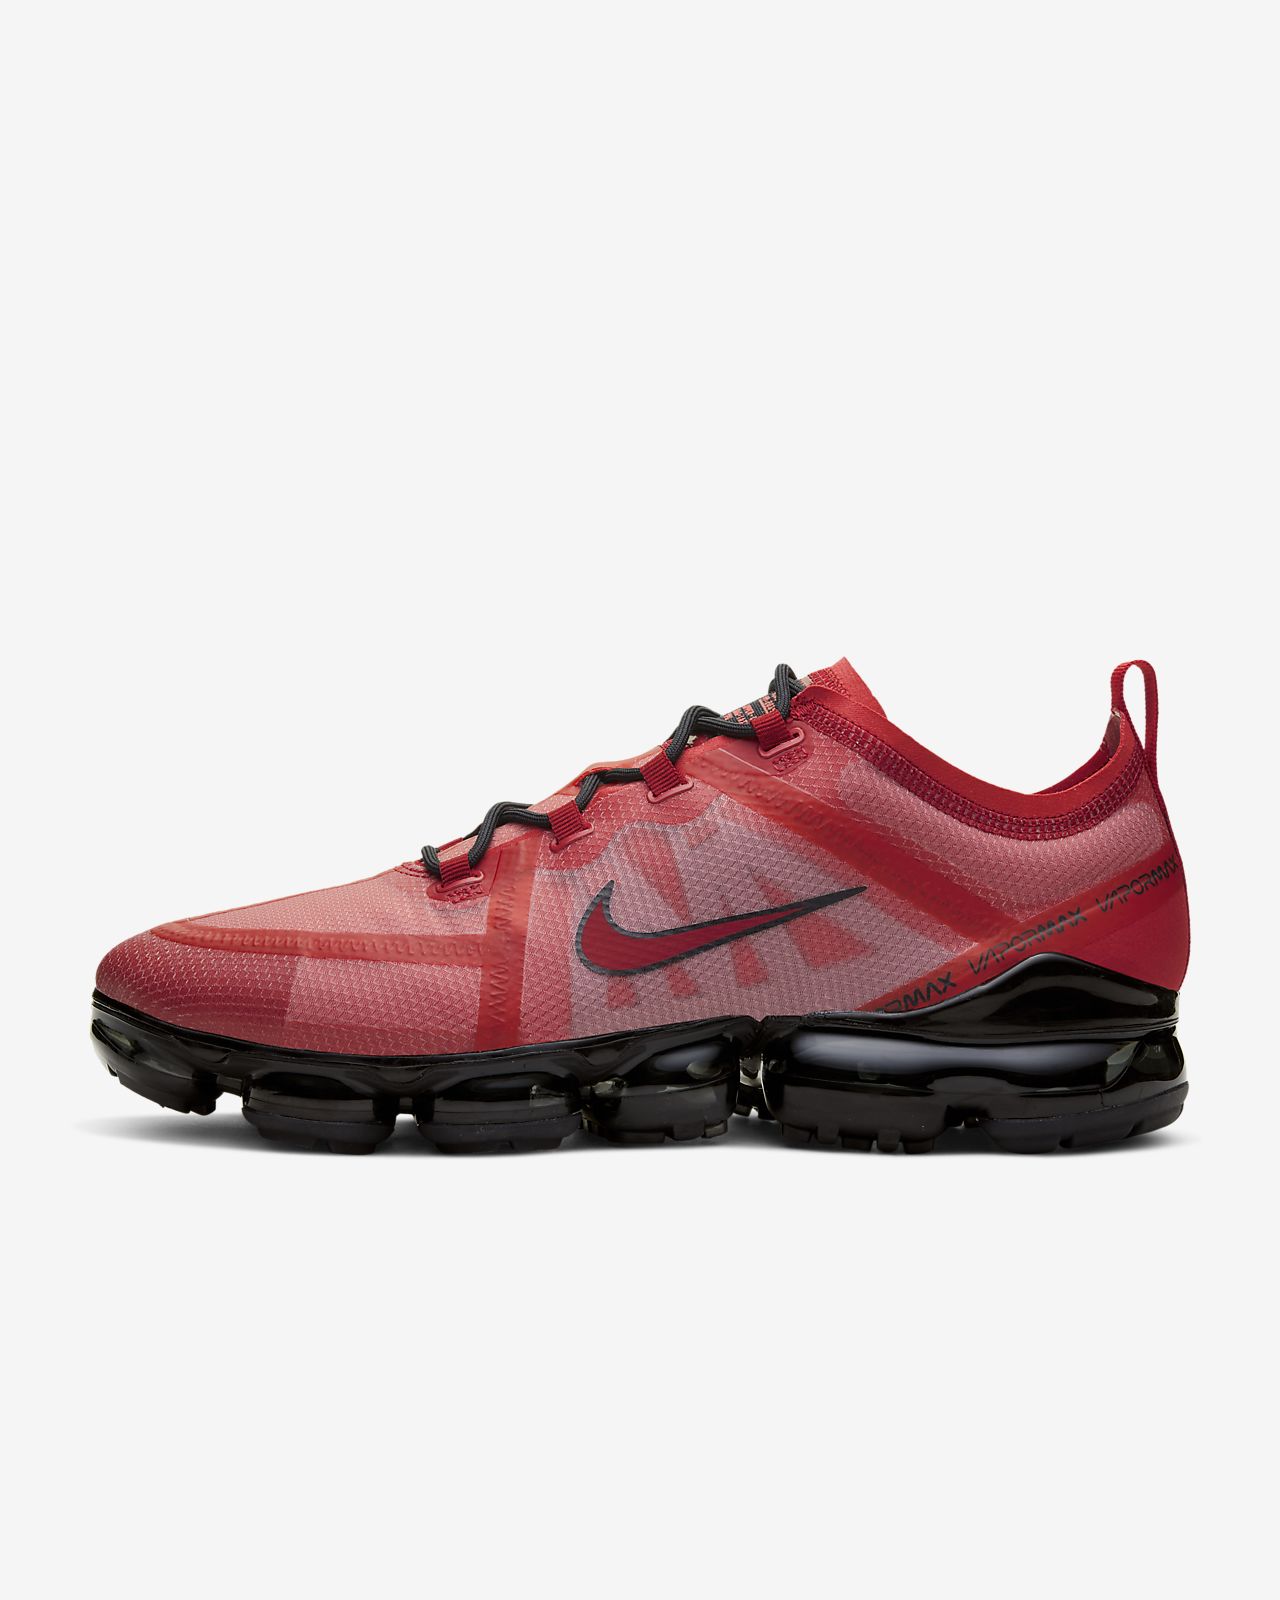 Nike air vapormax 97 for Sale in England Clothes Gumtree